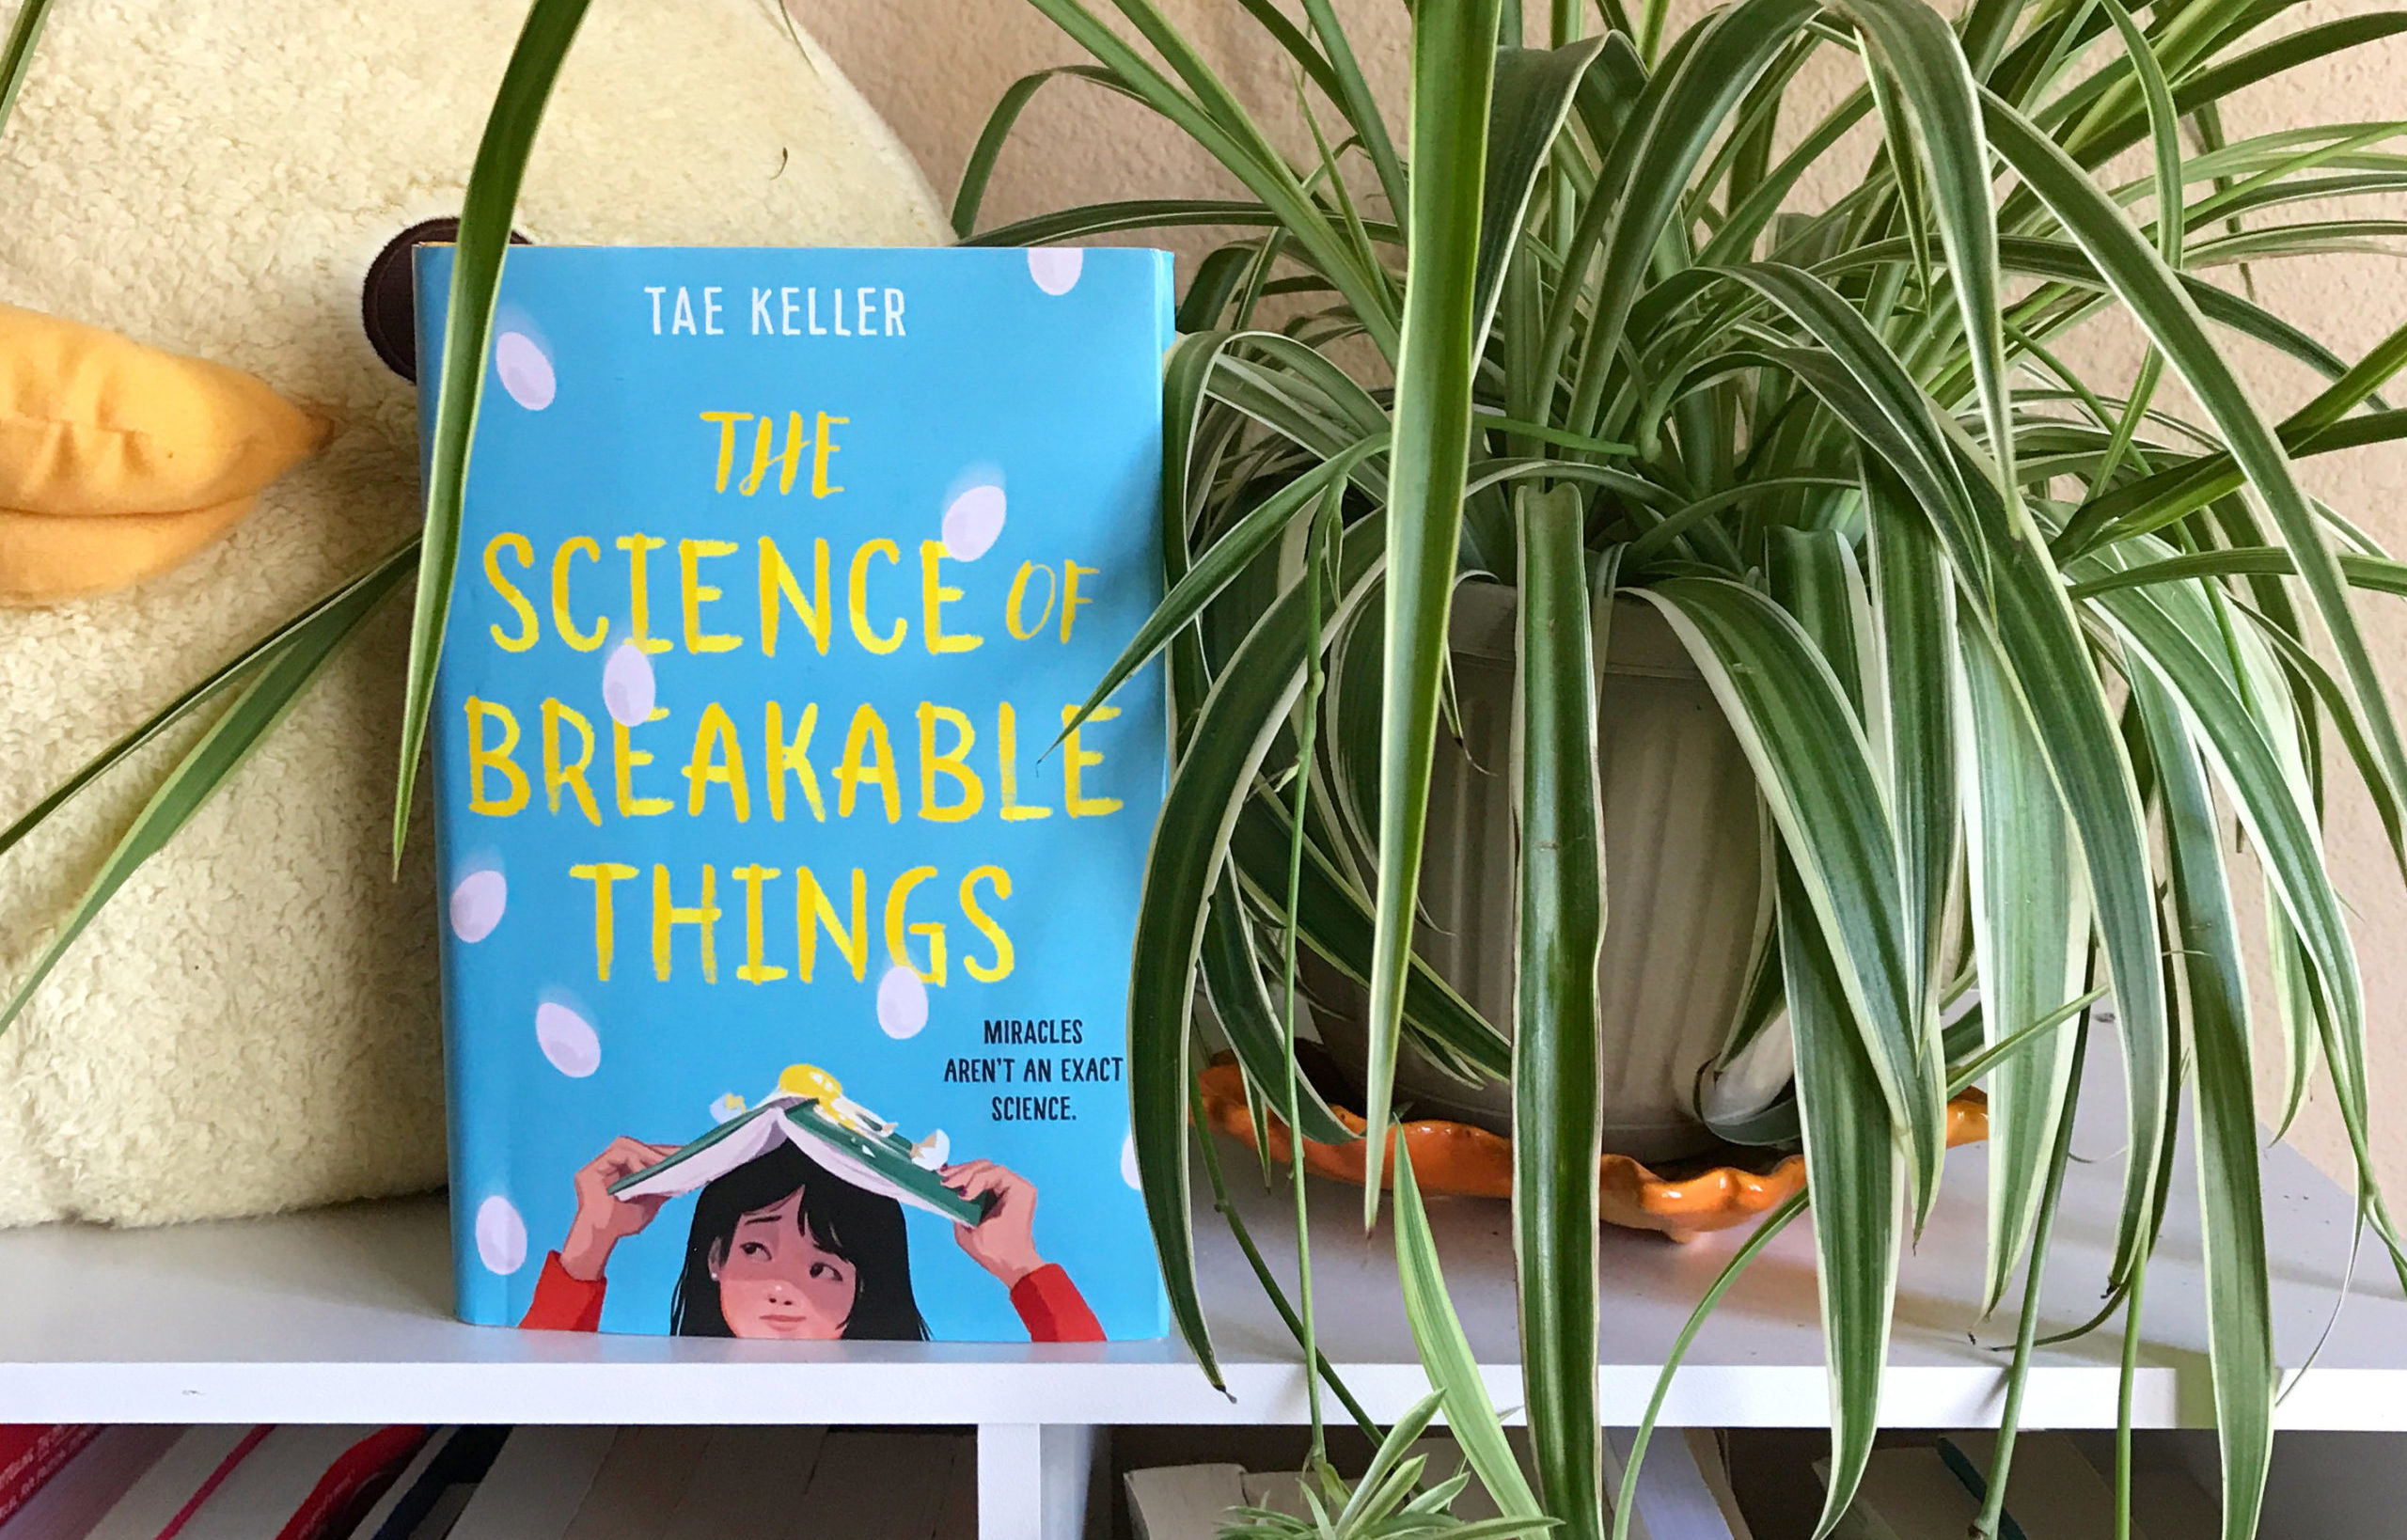 The Science of Breakable Things